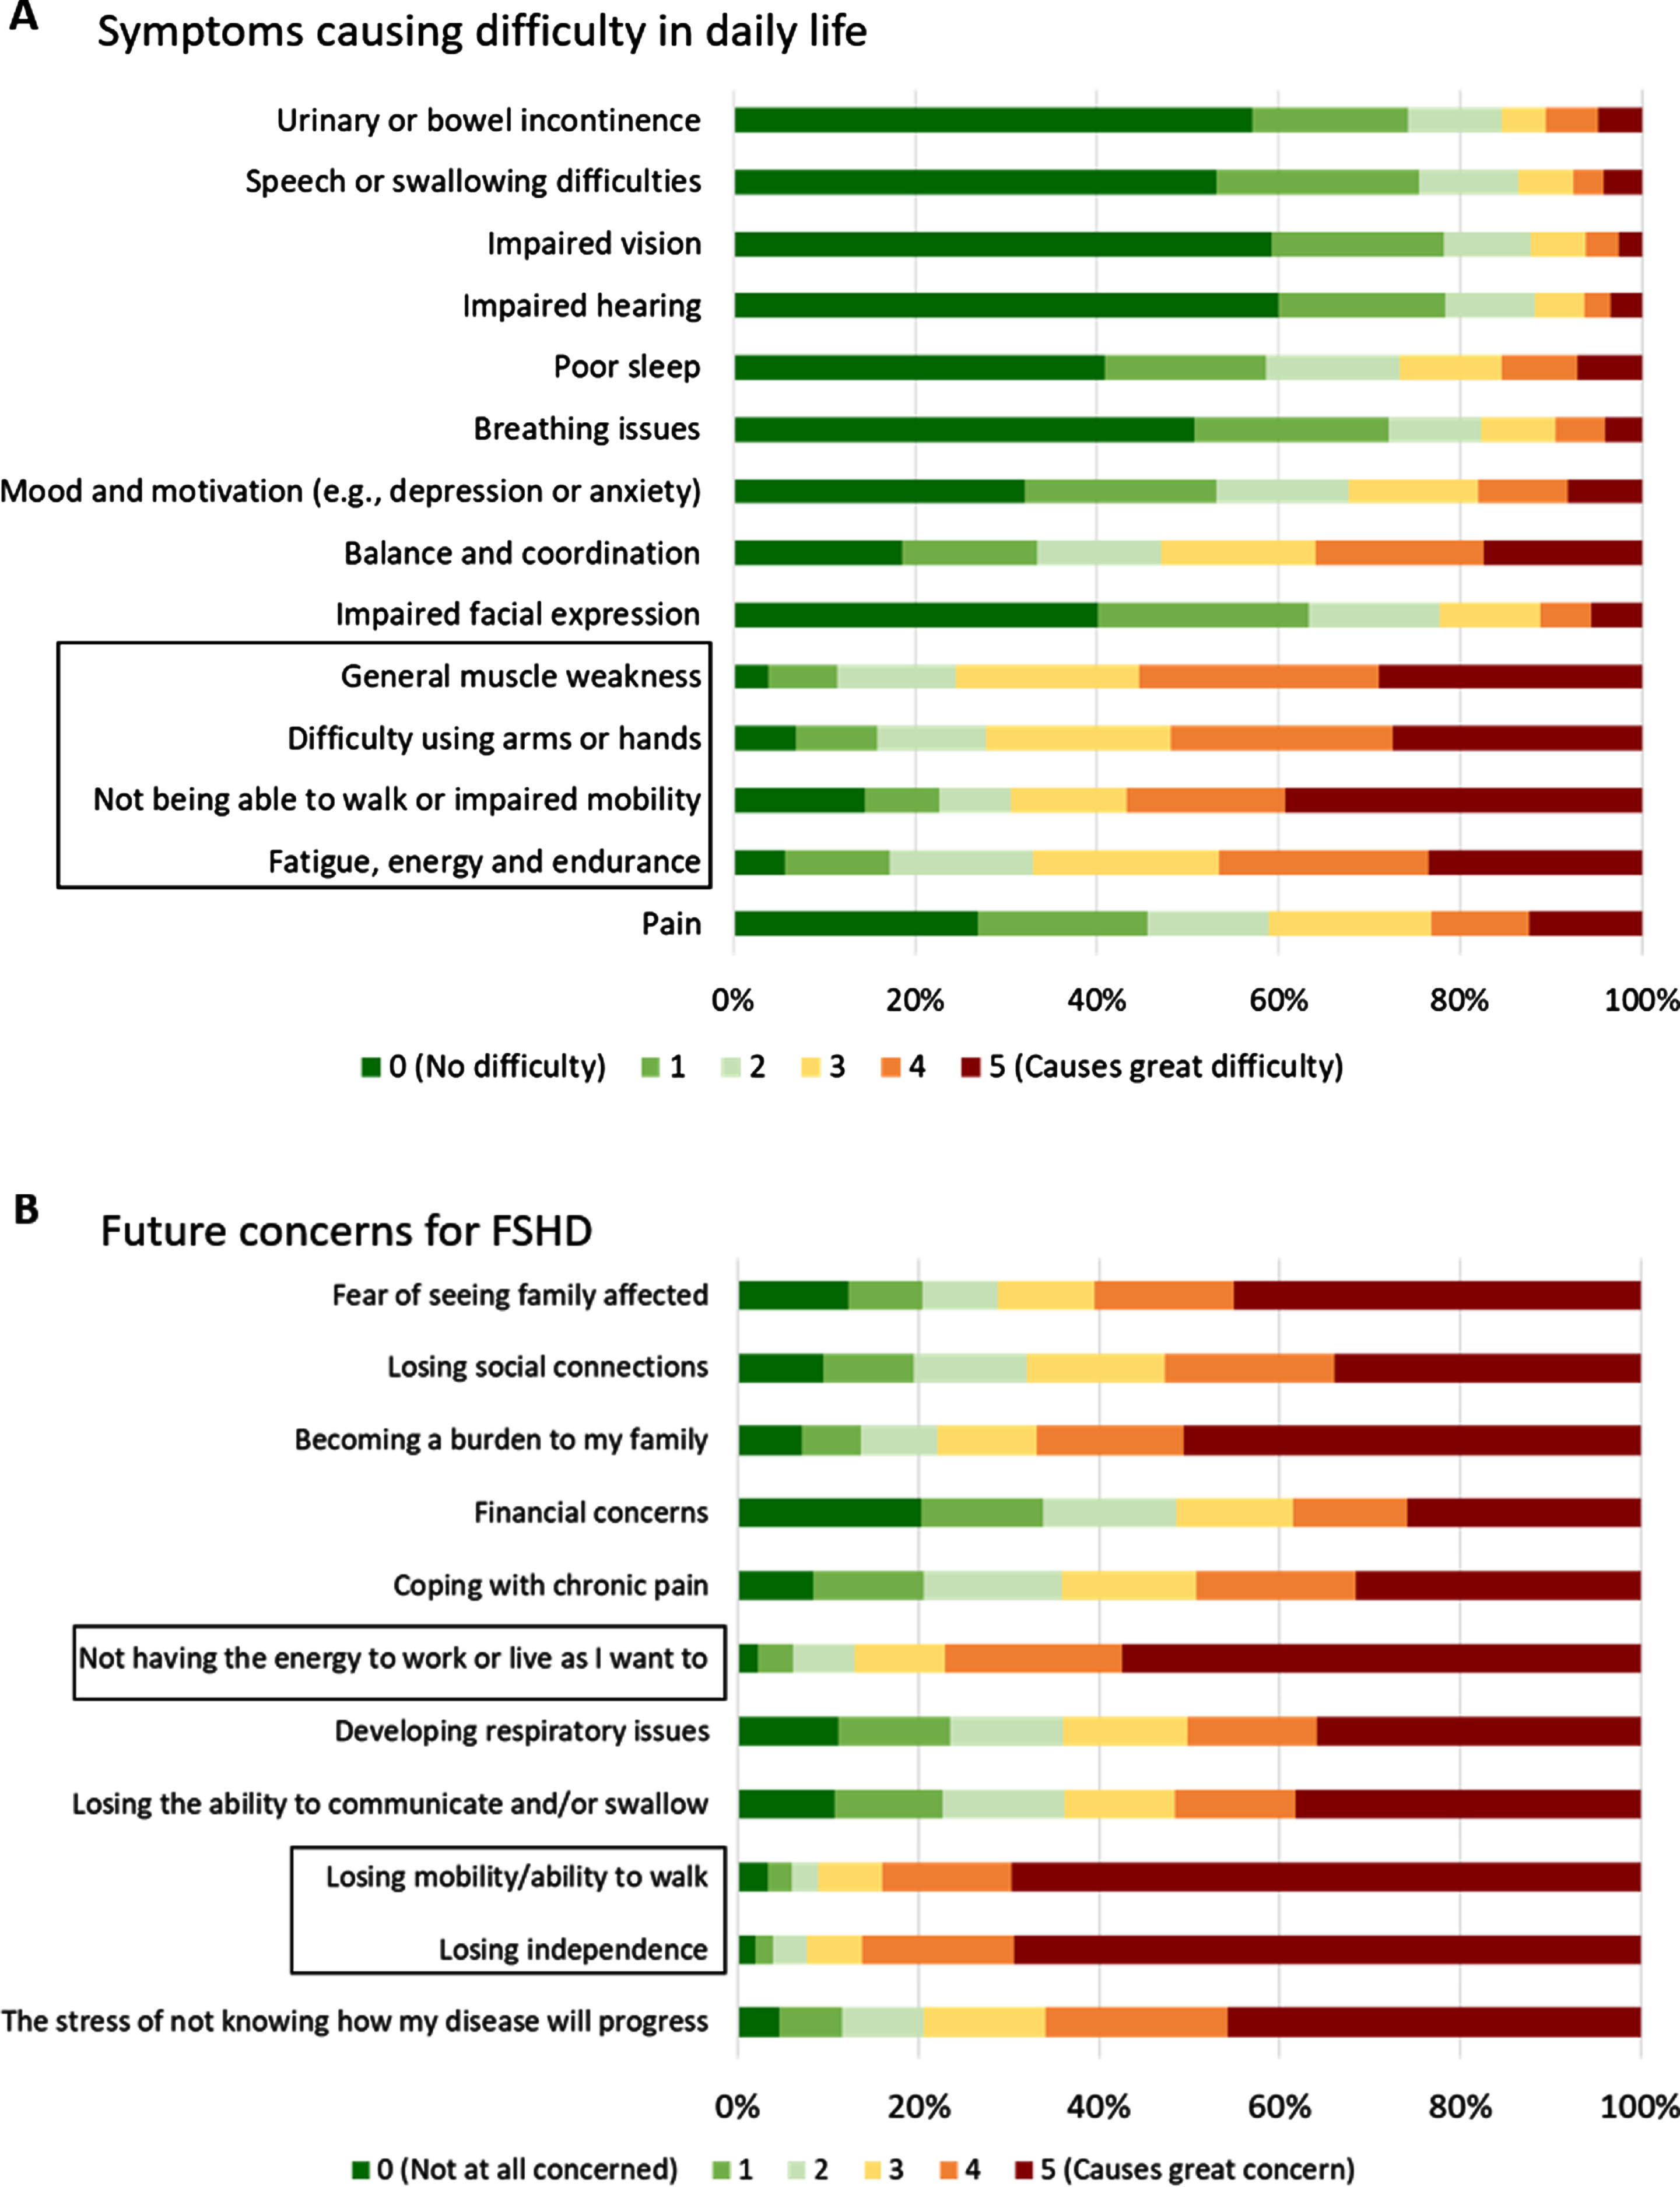 Participants experience of FSHD. [A] Symptoms causing difficulty in daily life. Participants (n = 1147) were asked to rank how particular symptoms caused difficulty in daily life from 0 (dark green; no difficulty) to 5 (red; causes great difficulty). Black box highlights symptoms which caused the largest majority of participants difficulty. [B] Future concerns for FSHD. Participants (n = 1147) were asked to rank what concerned them most about the future from 0 (dark green; not at all concerned) to 5 (red; causes great concern). Black box indicates the issue that cause the largest majority of participants concerns for the future.